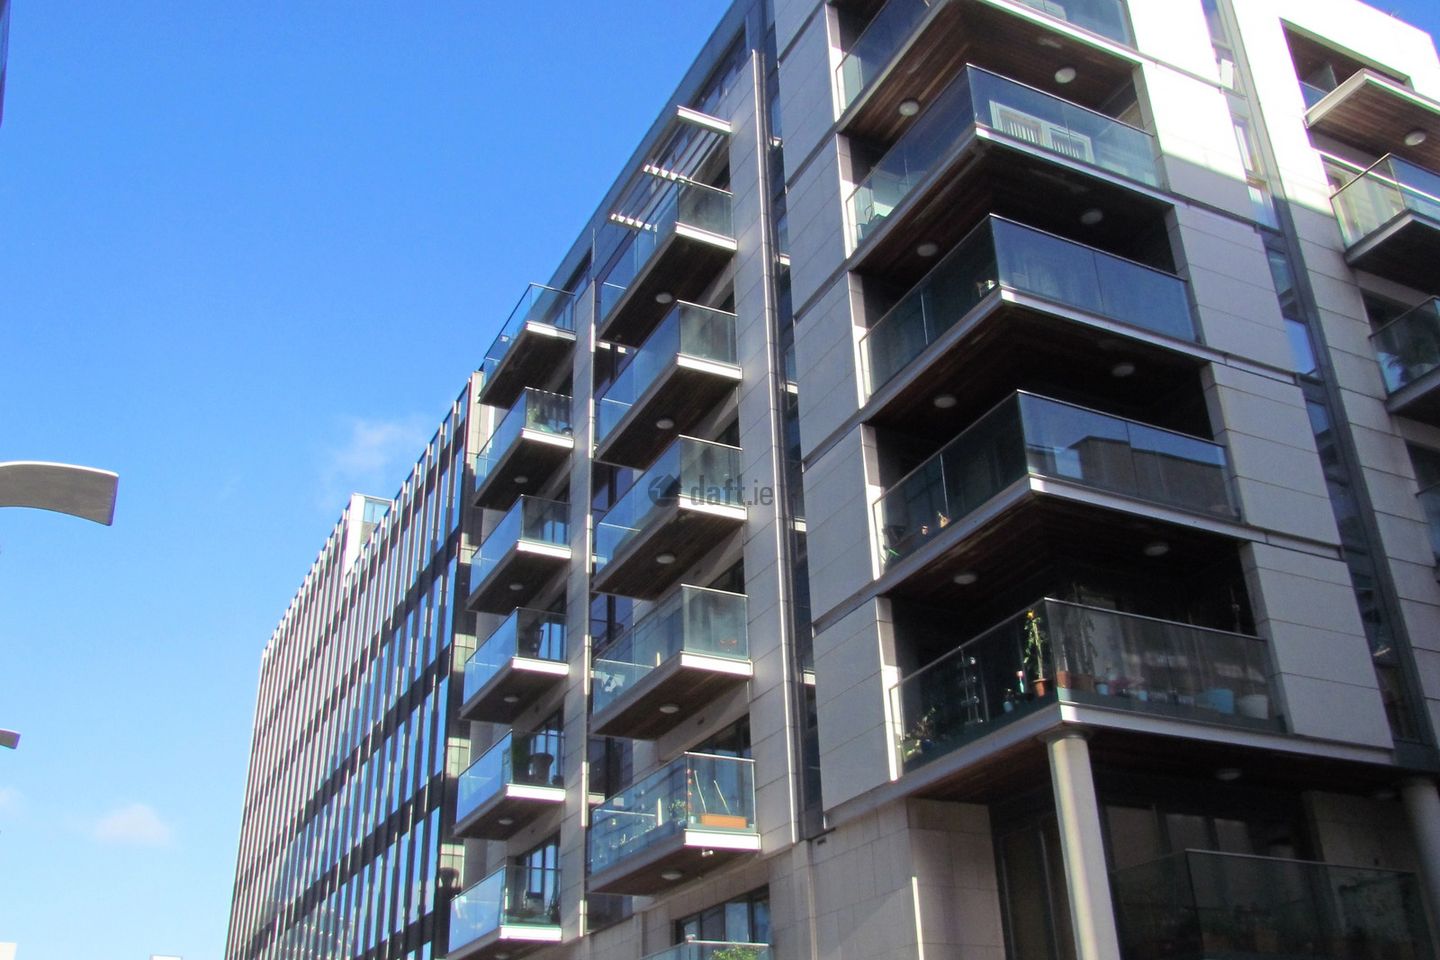 Forbes Quay Apartments, Grand Canal Dock, Dublin 2